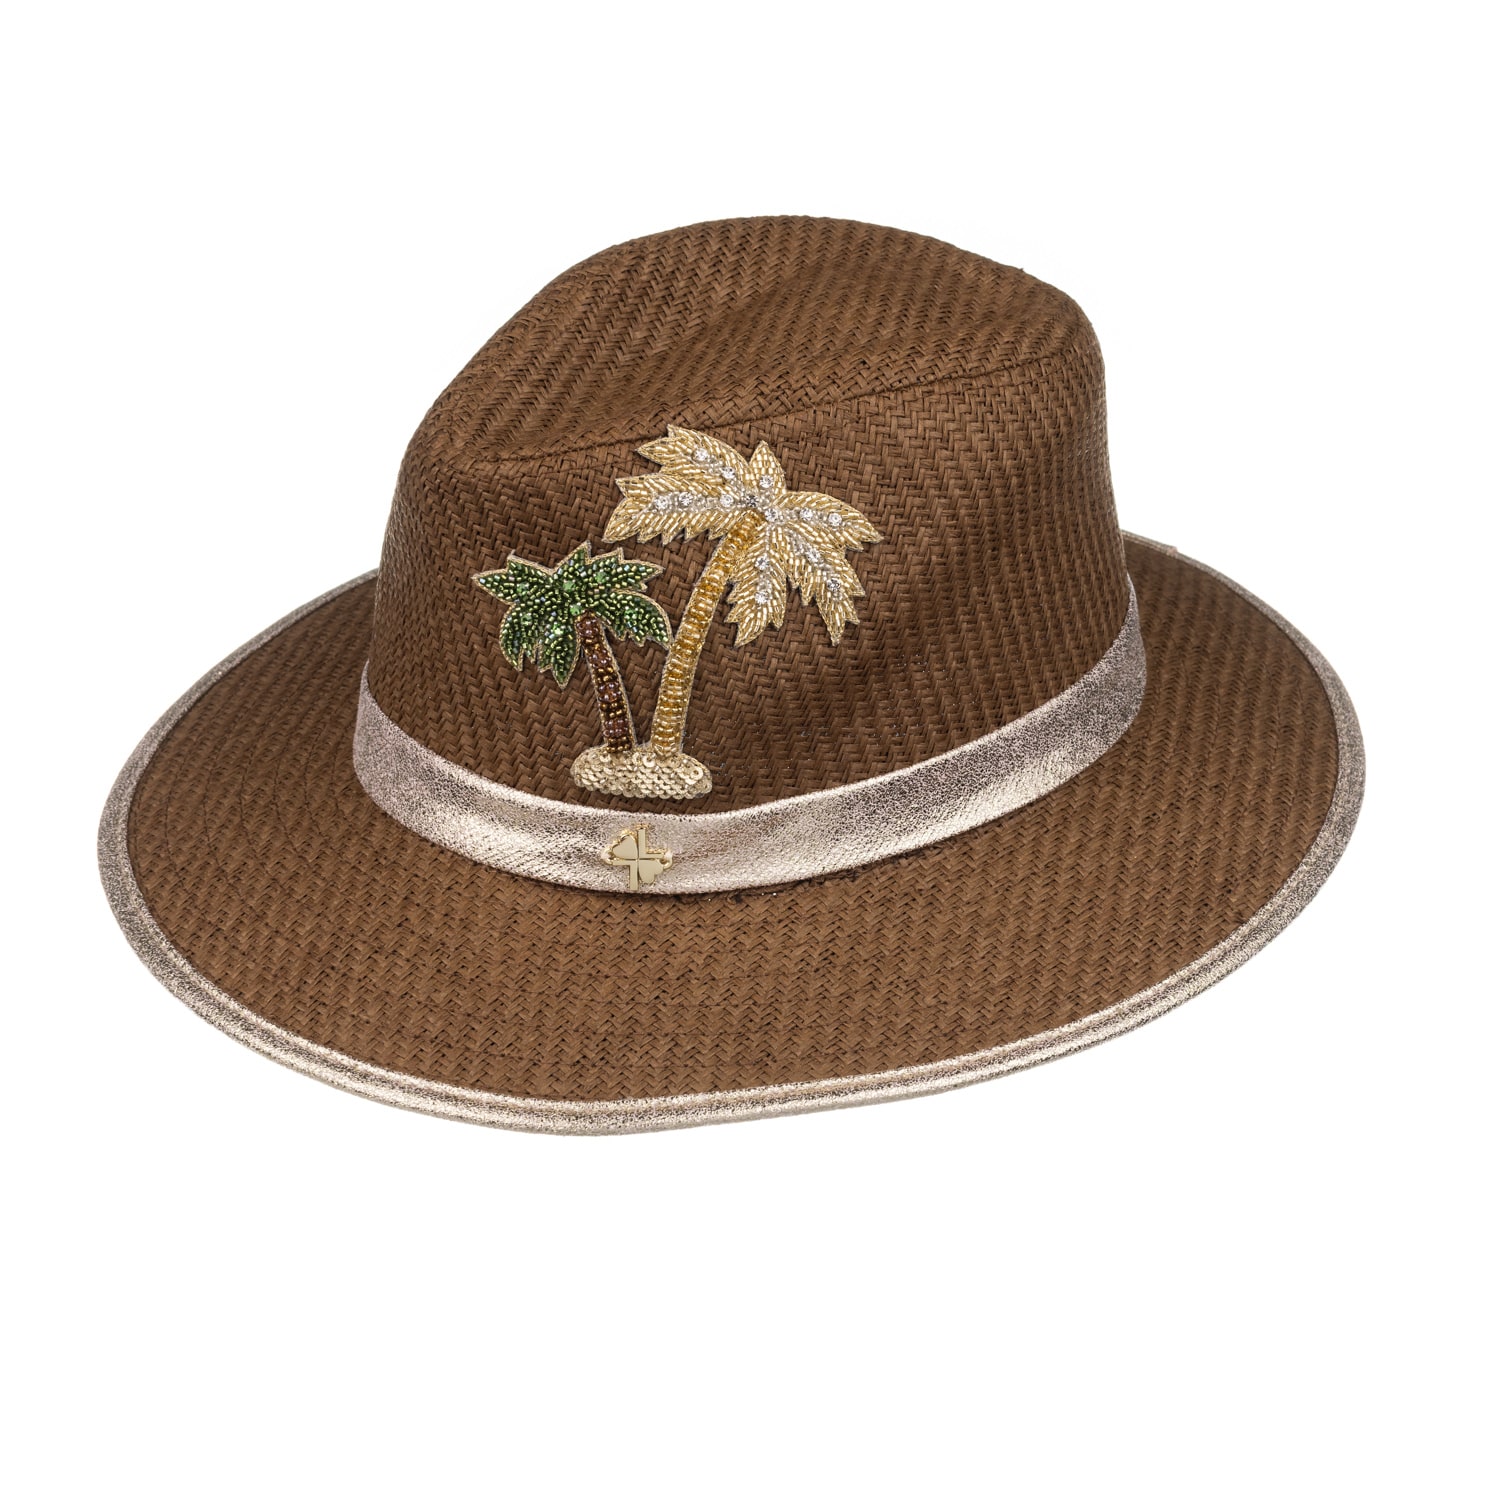 Laines London Women's Brown Straw Woven Hat With Couture Embellished Palm Tree Design - Caramel